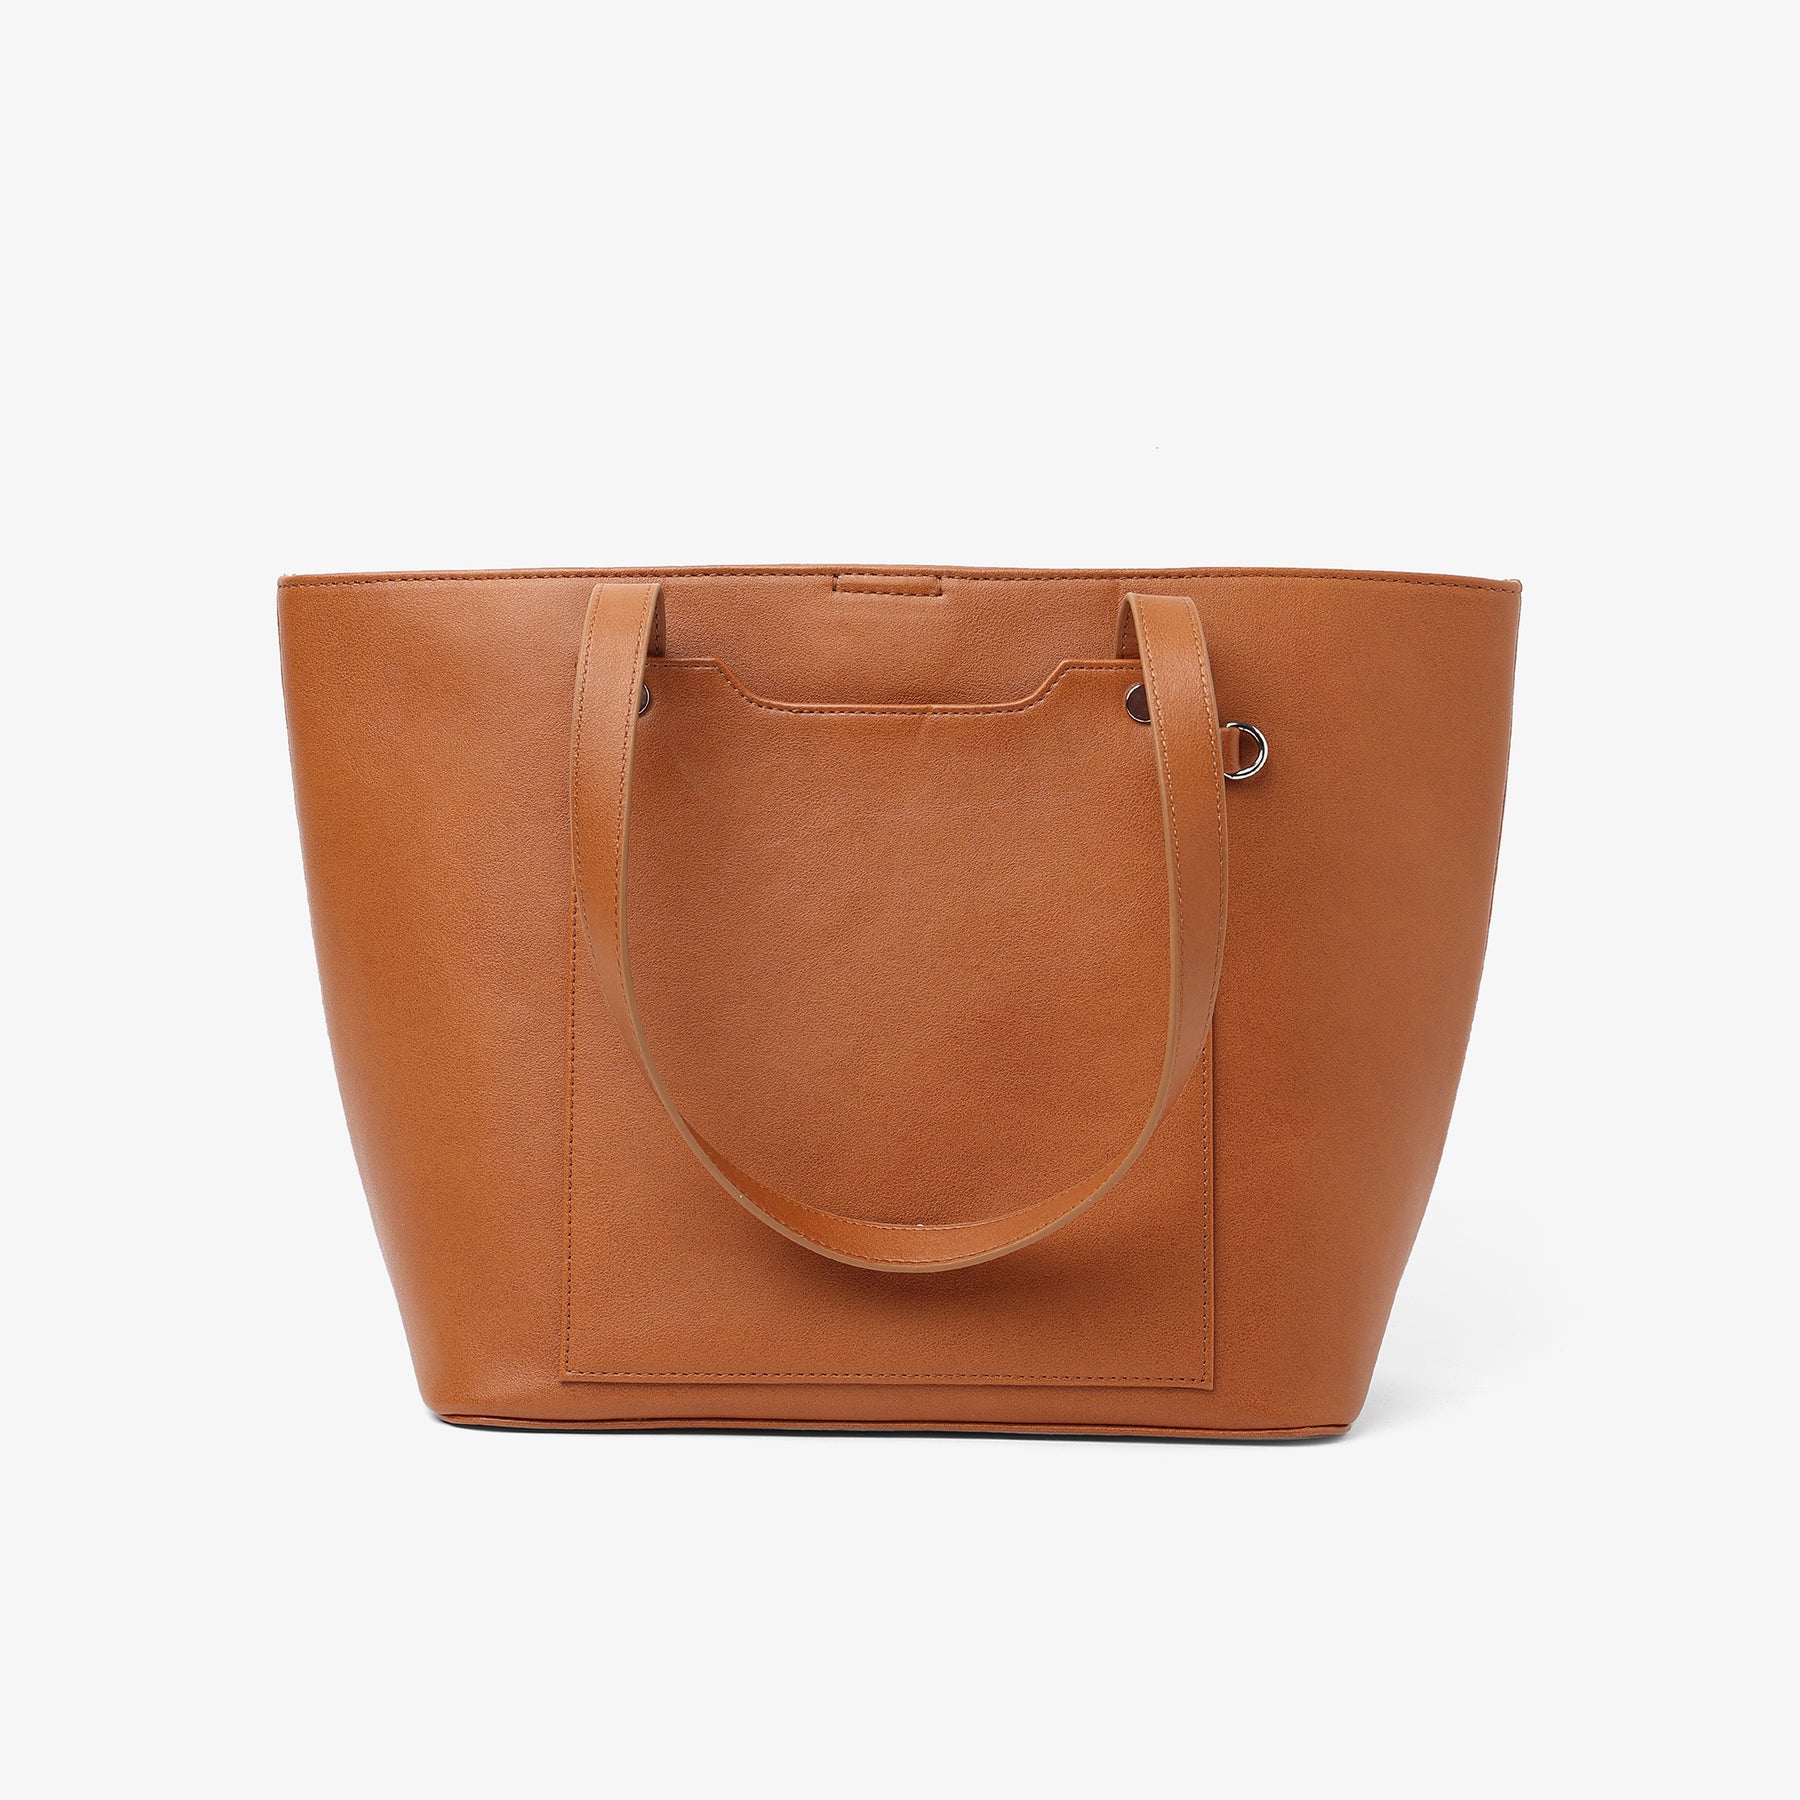 Personalised Classic Tote Bag - Tan by The Messy Corner